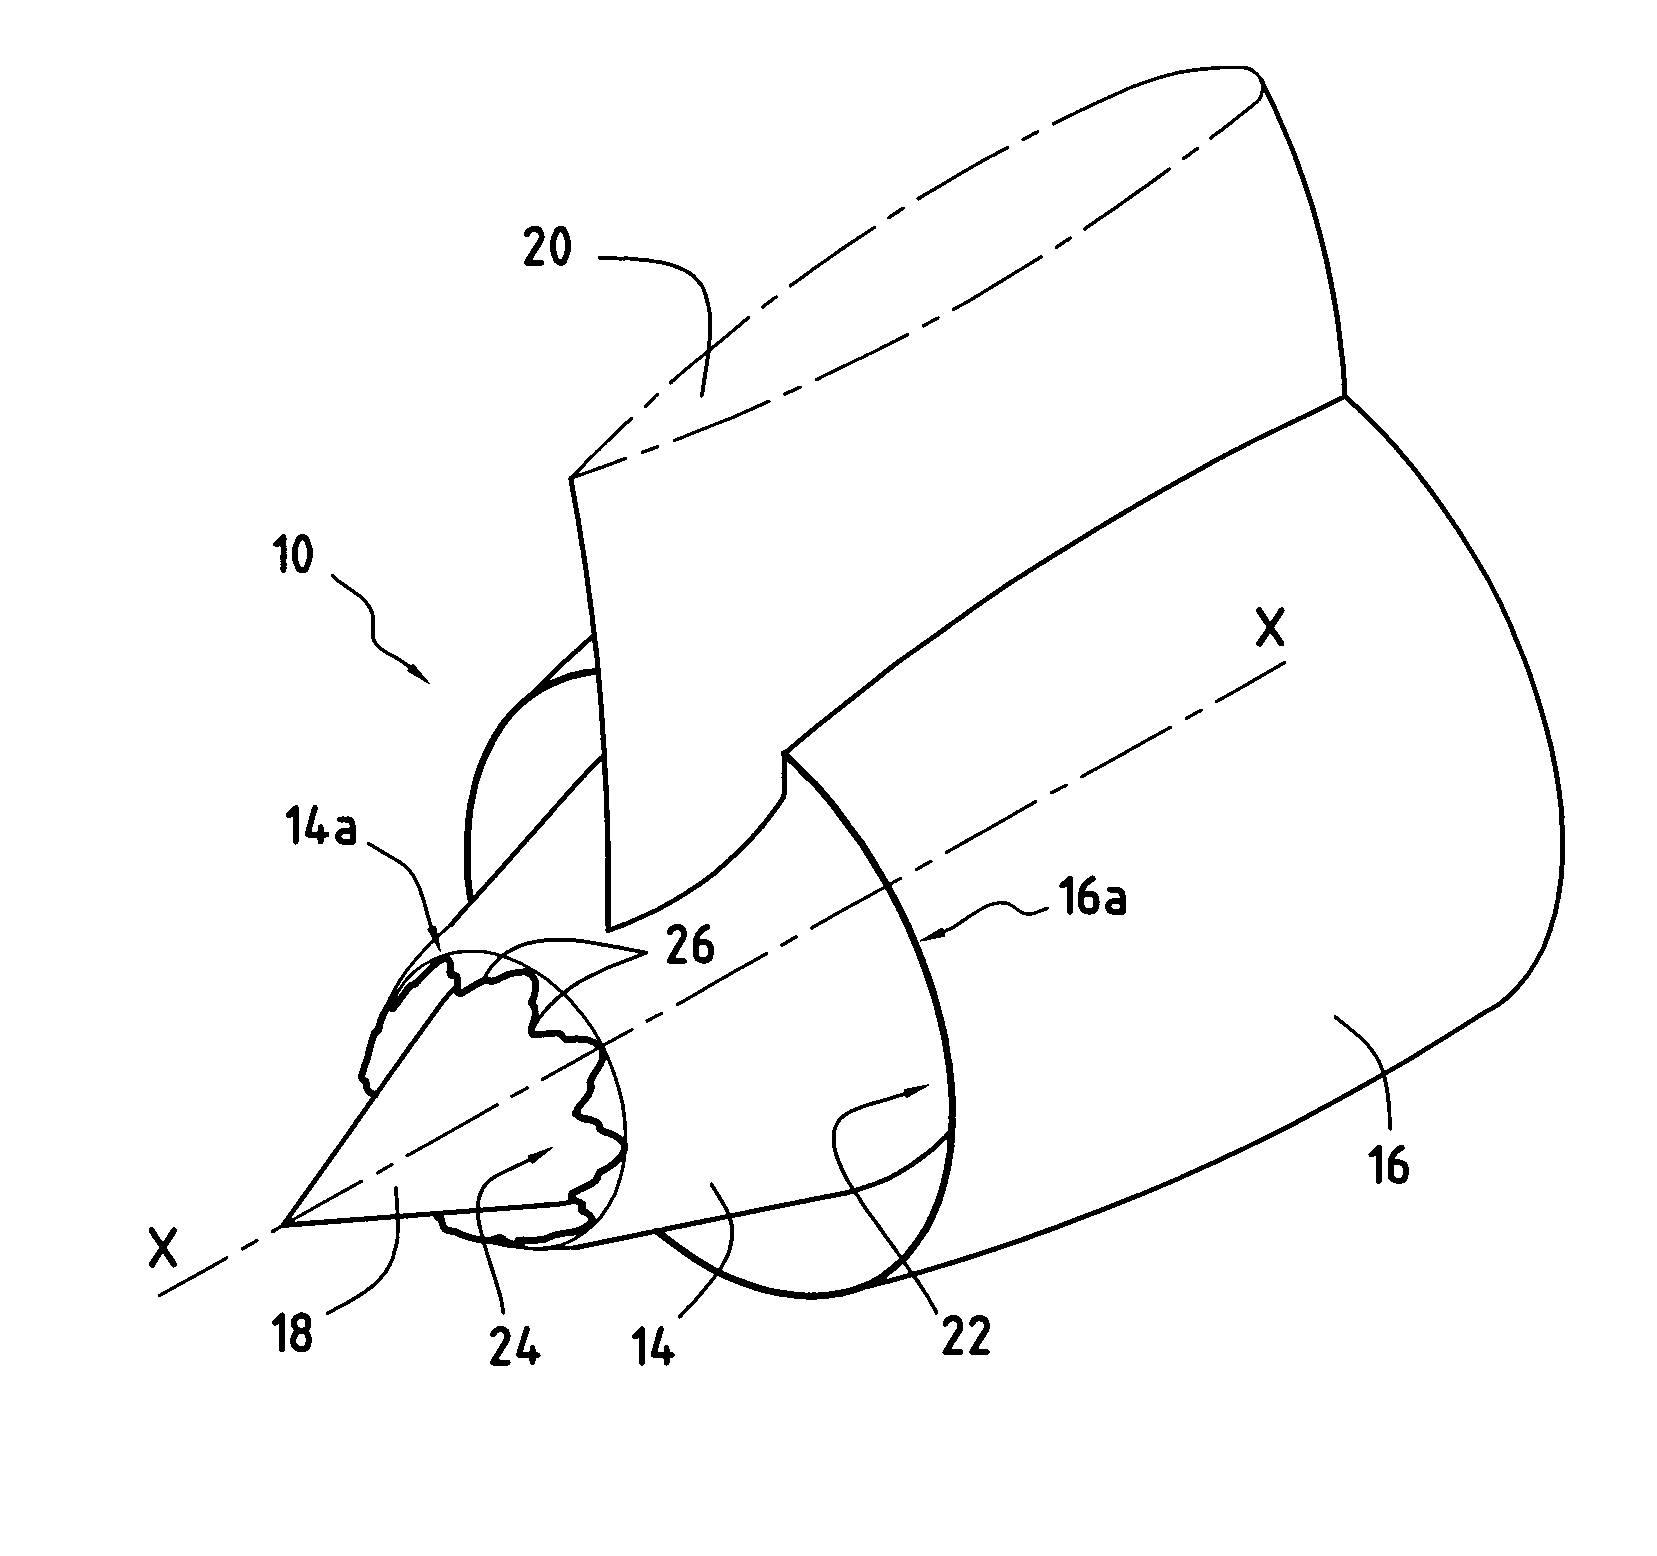 Turbomachine nozzle cover provided with triangular patterns having a point of inflexion for reducing jet noise